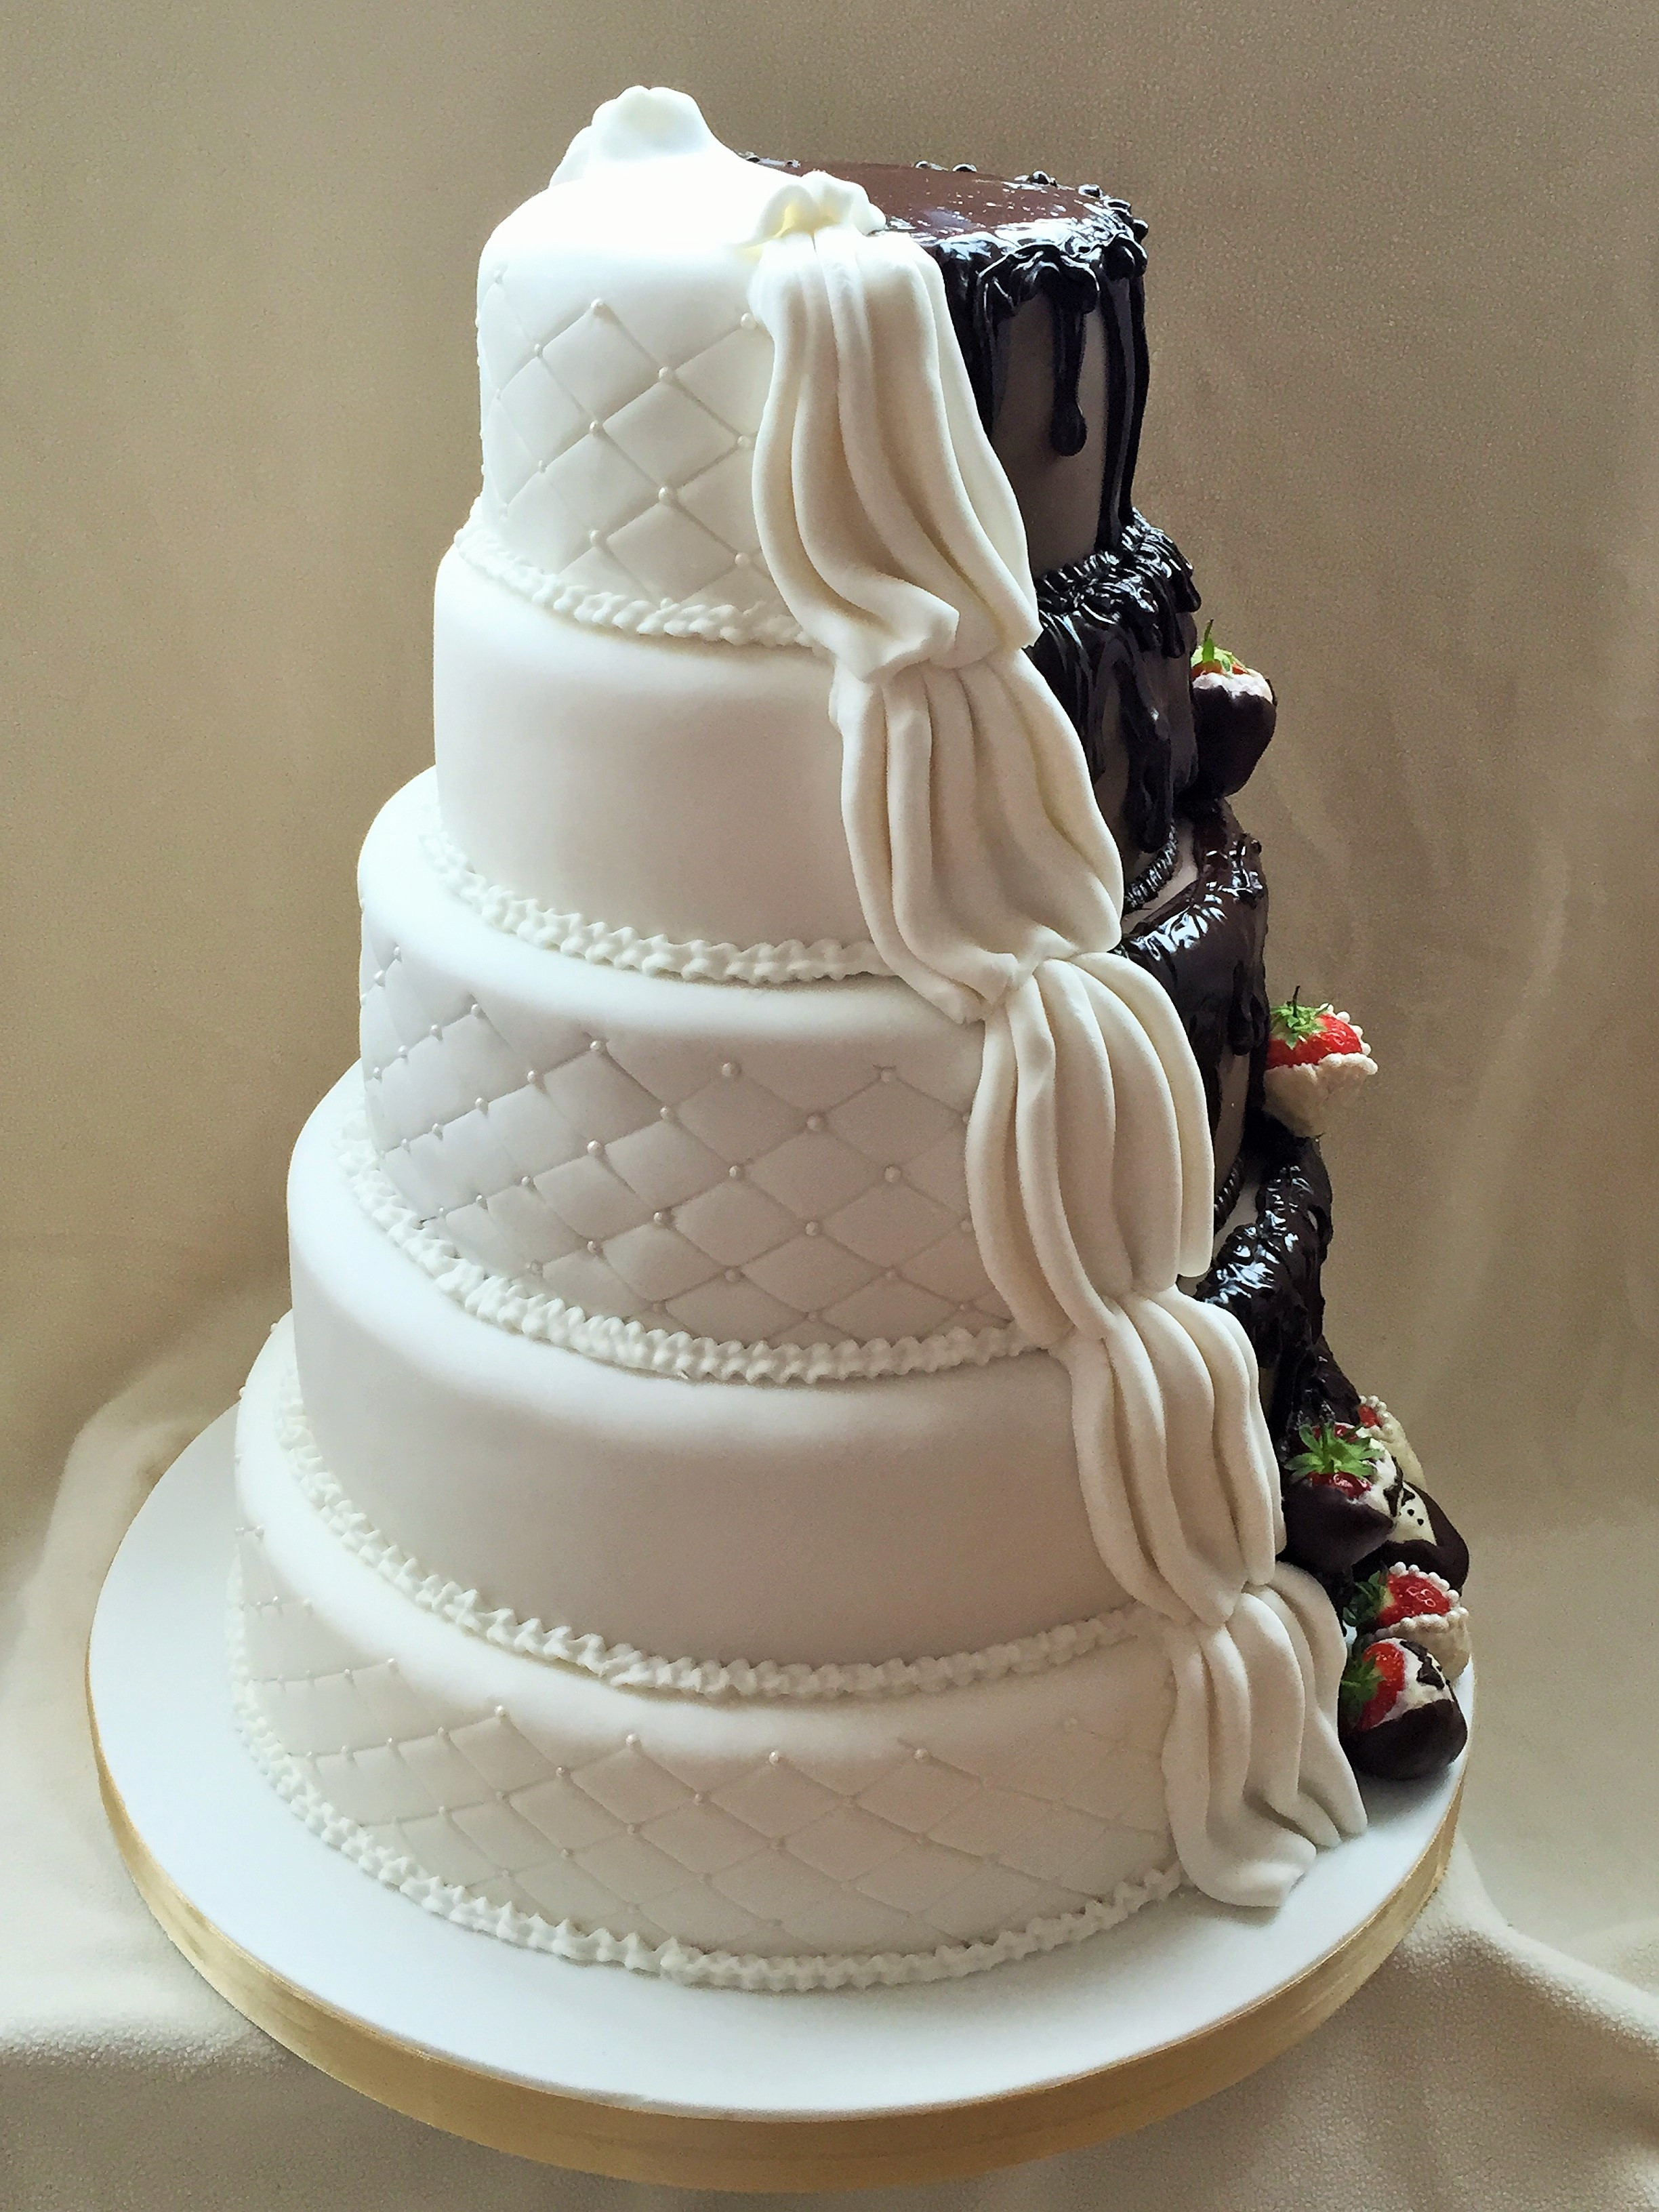 Half and Half Wedding Cakes 20 Of the Best Ideas for Half and Half Wedding Cake Cakecentral